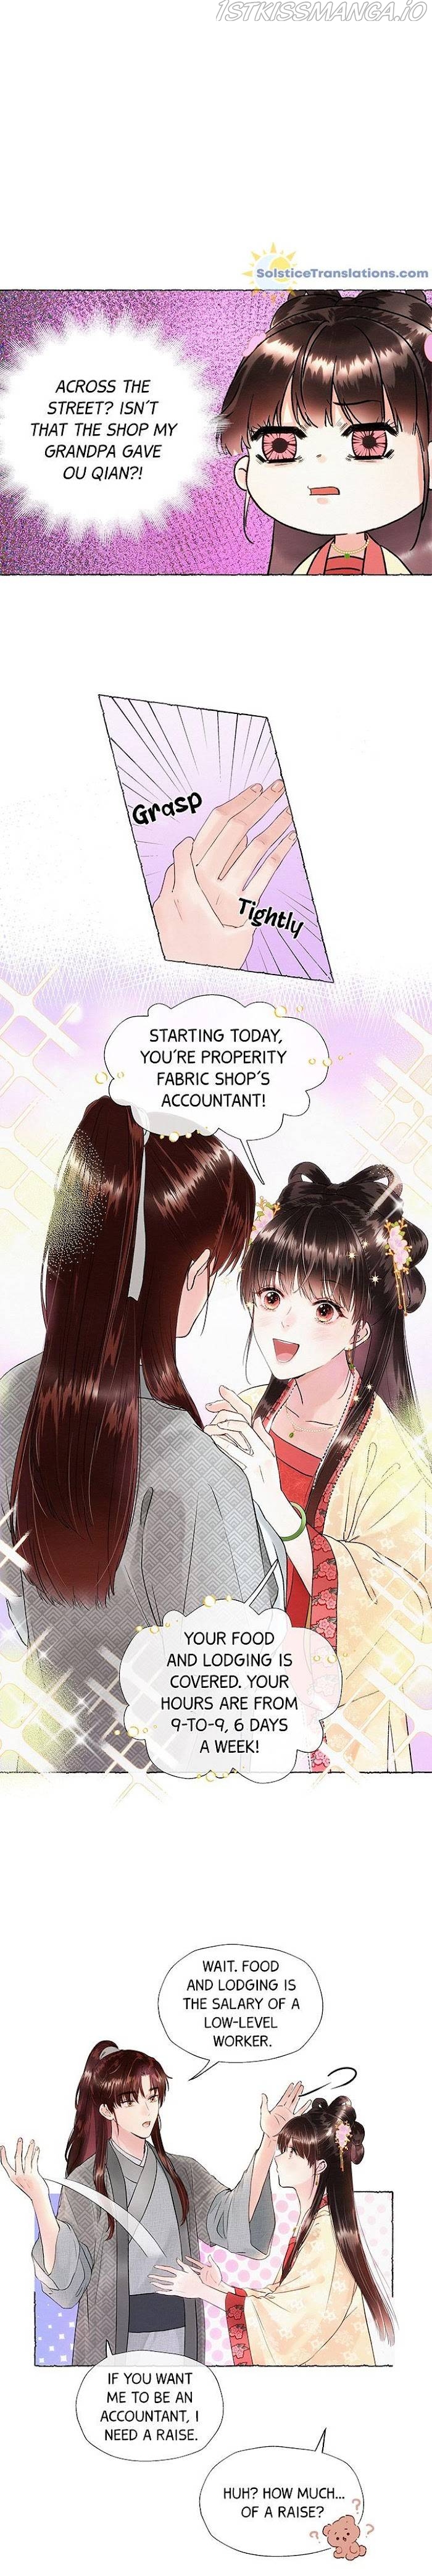 Did Yuanbao Make Money Today? chapter 4